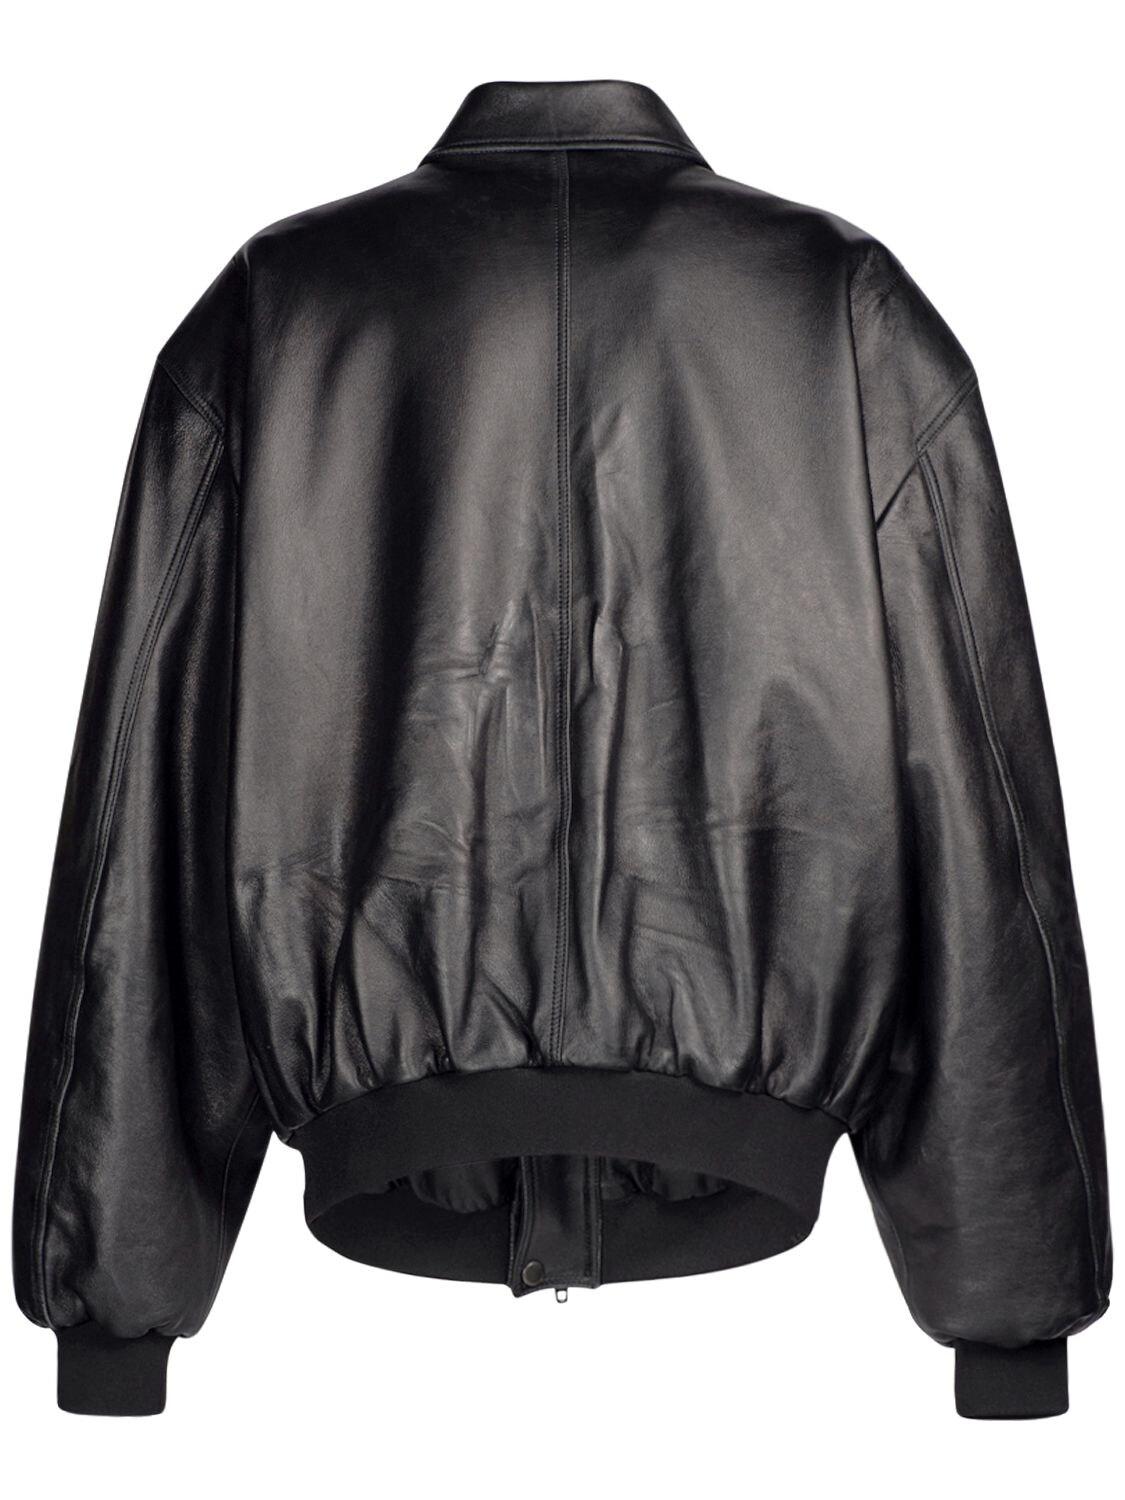 Balenciaga Taxi Leather Bomber Jacket in Black | Lyst